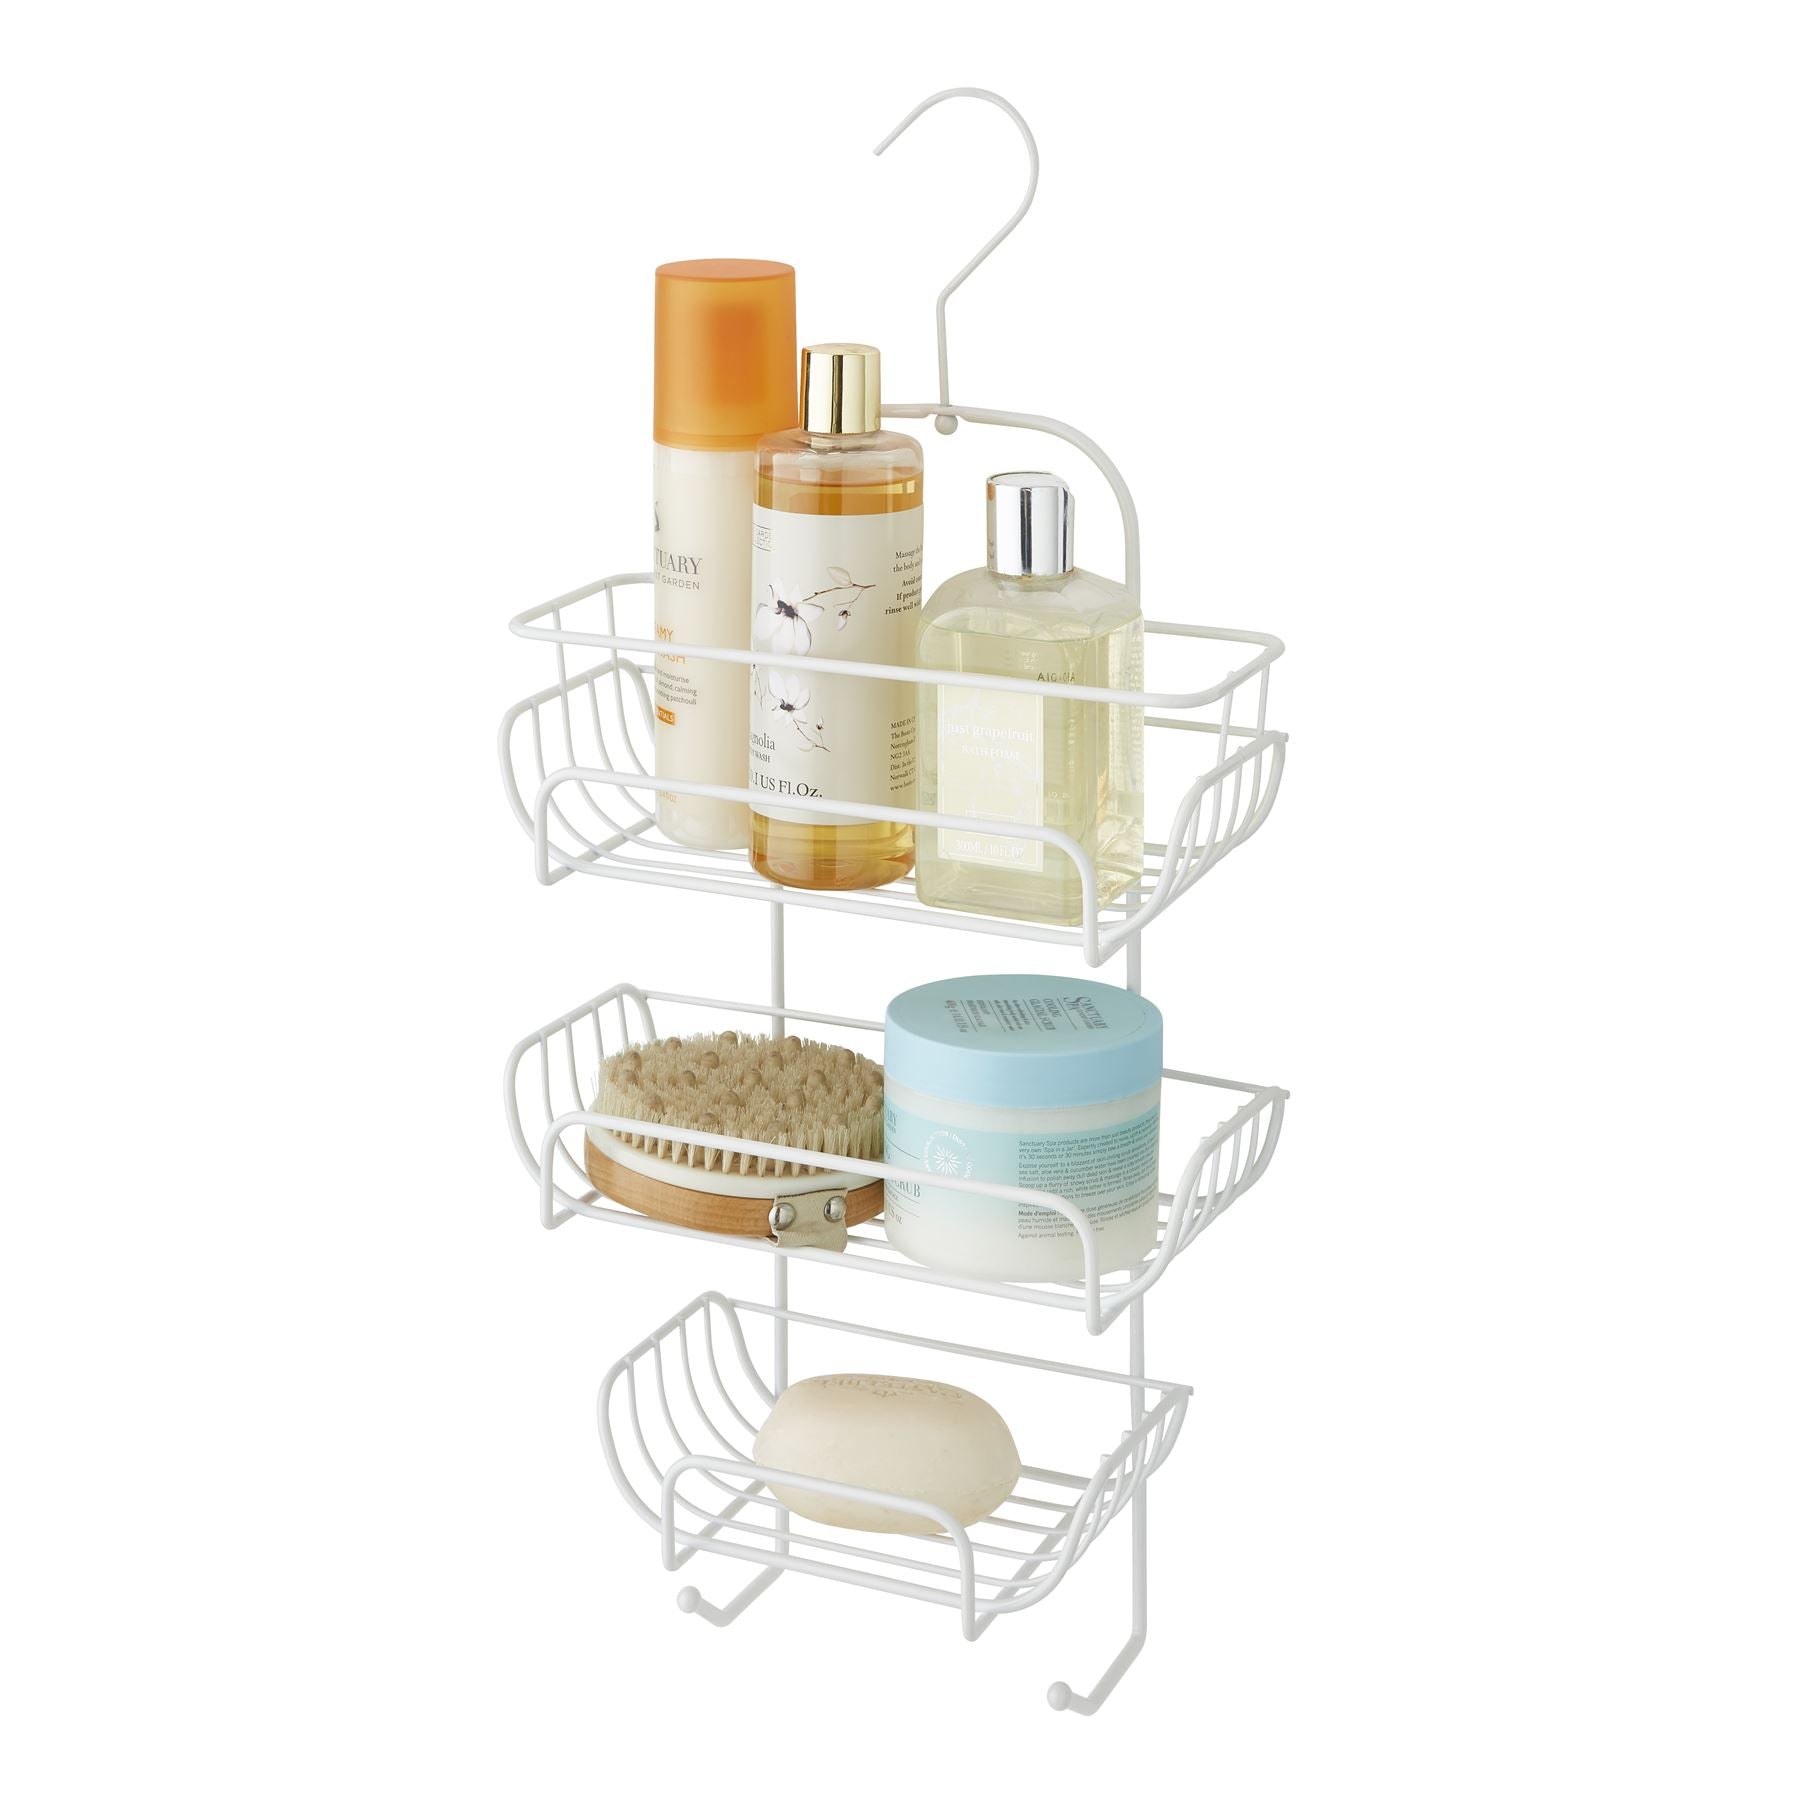 at Home Iron 3-Tray Satin Nickel Shower Caddy with Powder Coating